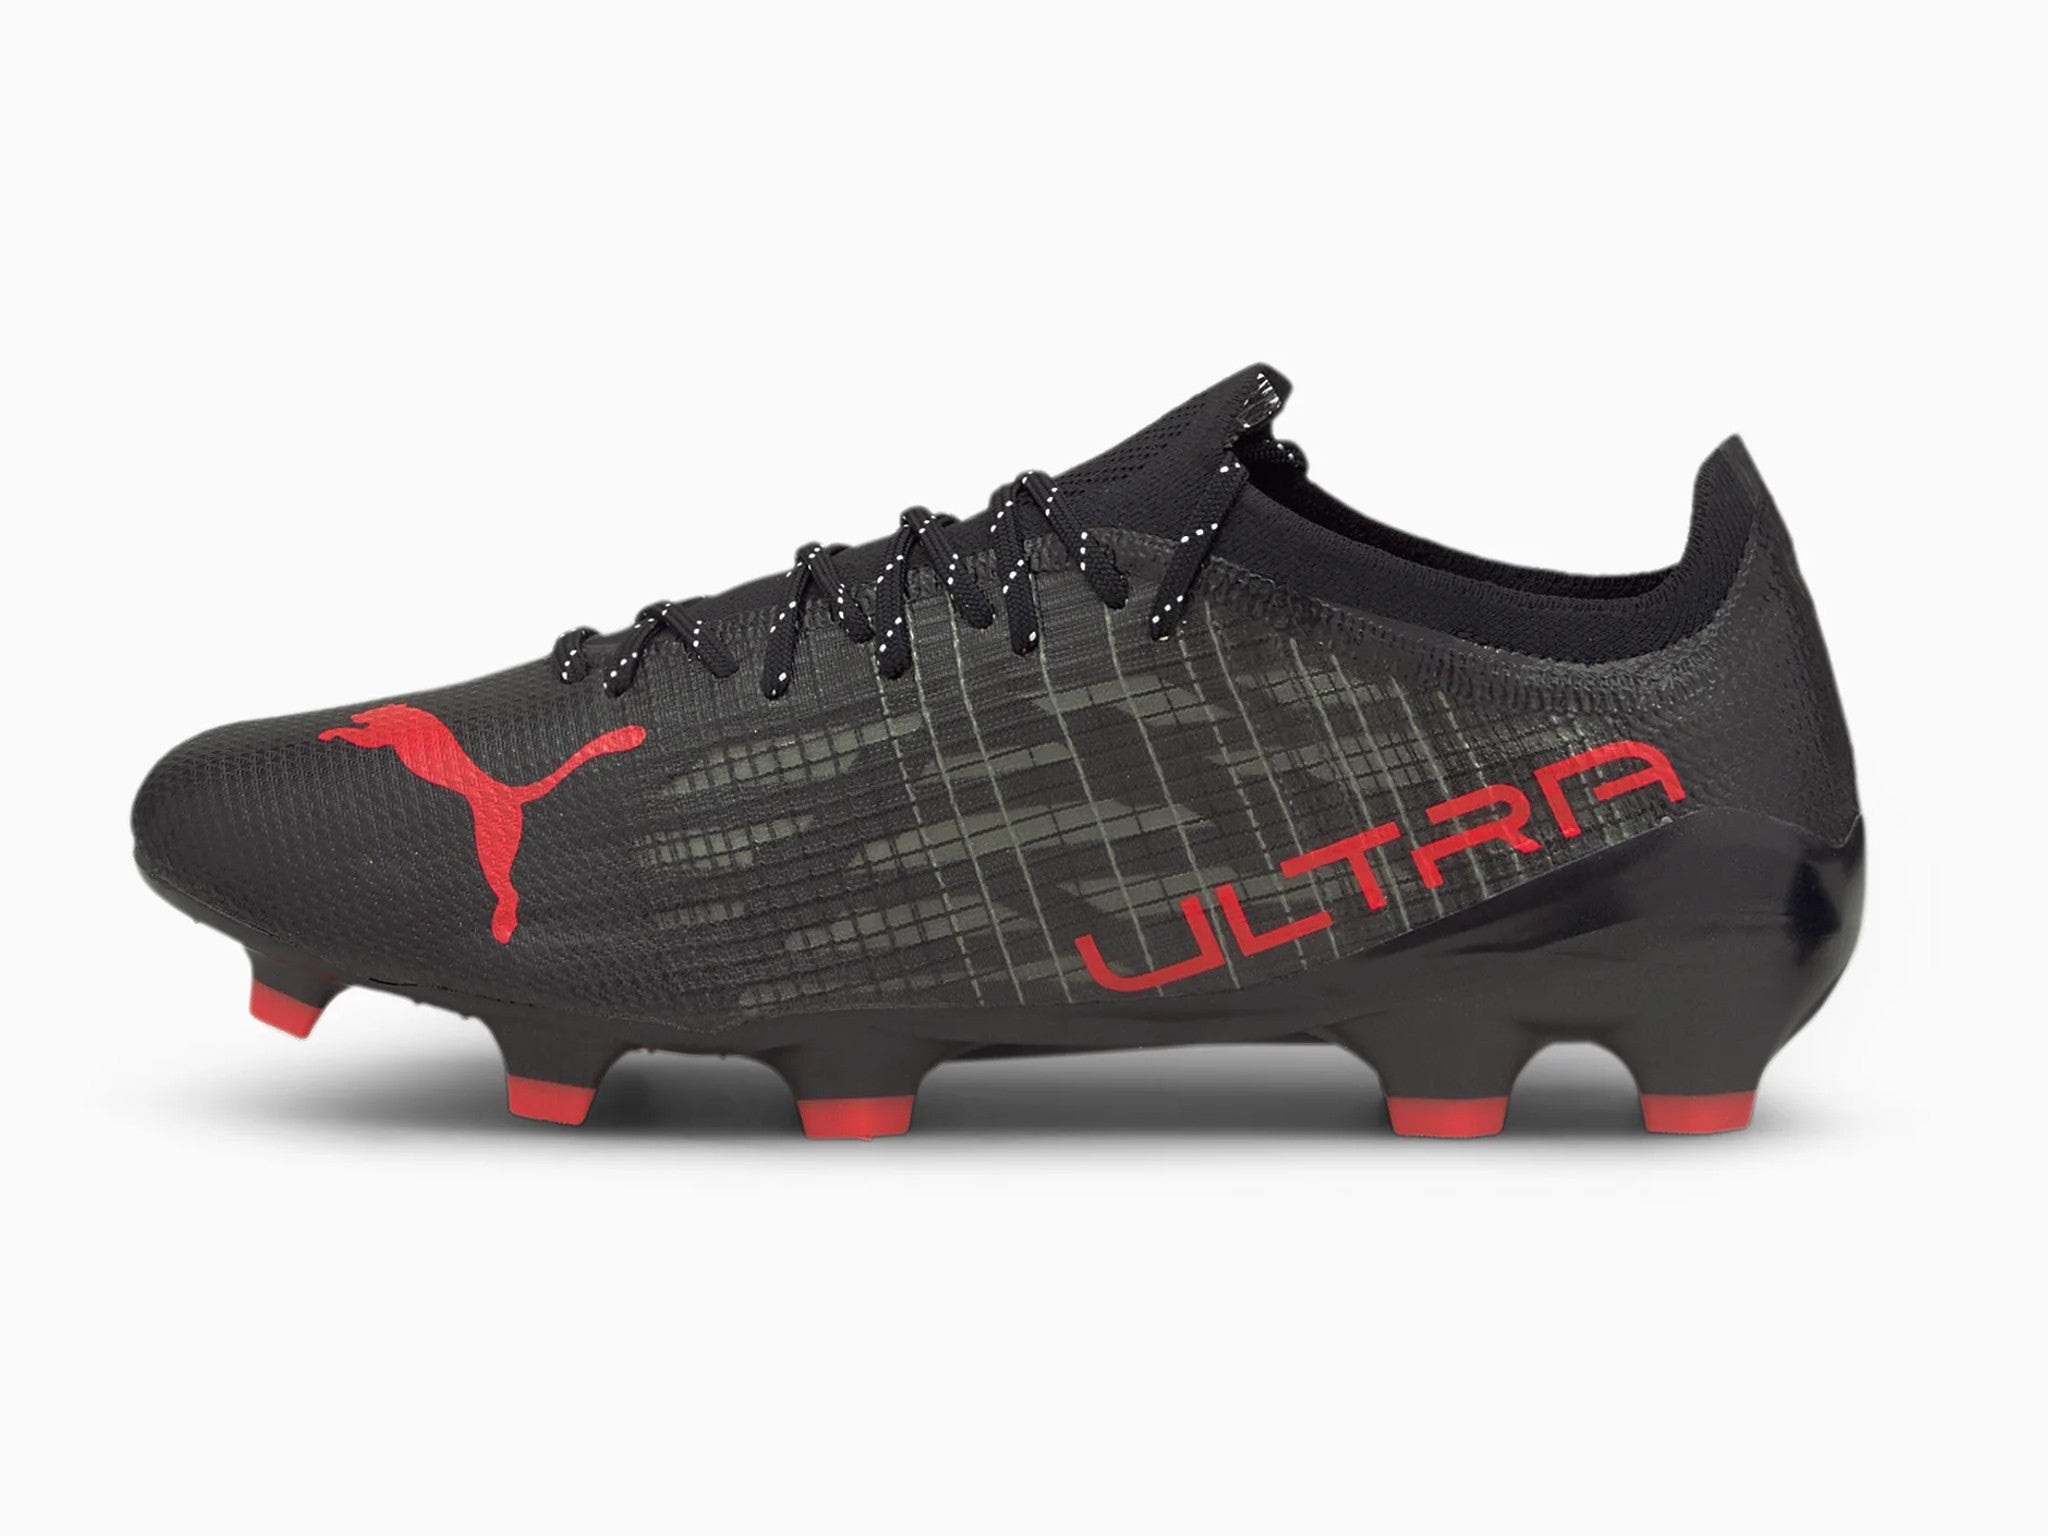 Best astro turf football boots 2021: For playing on 3G and 4G pitches